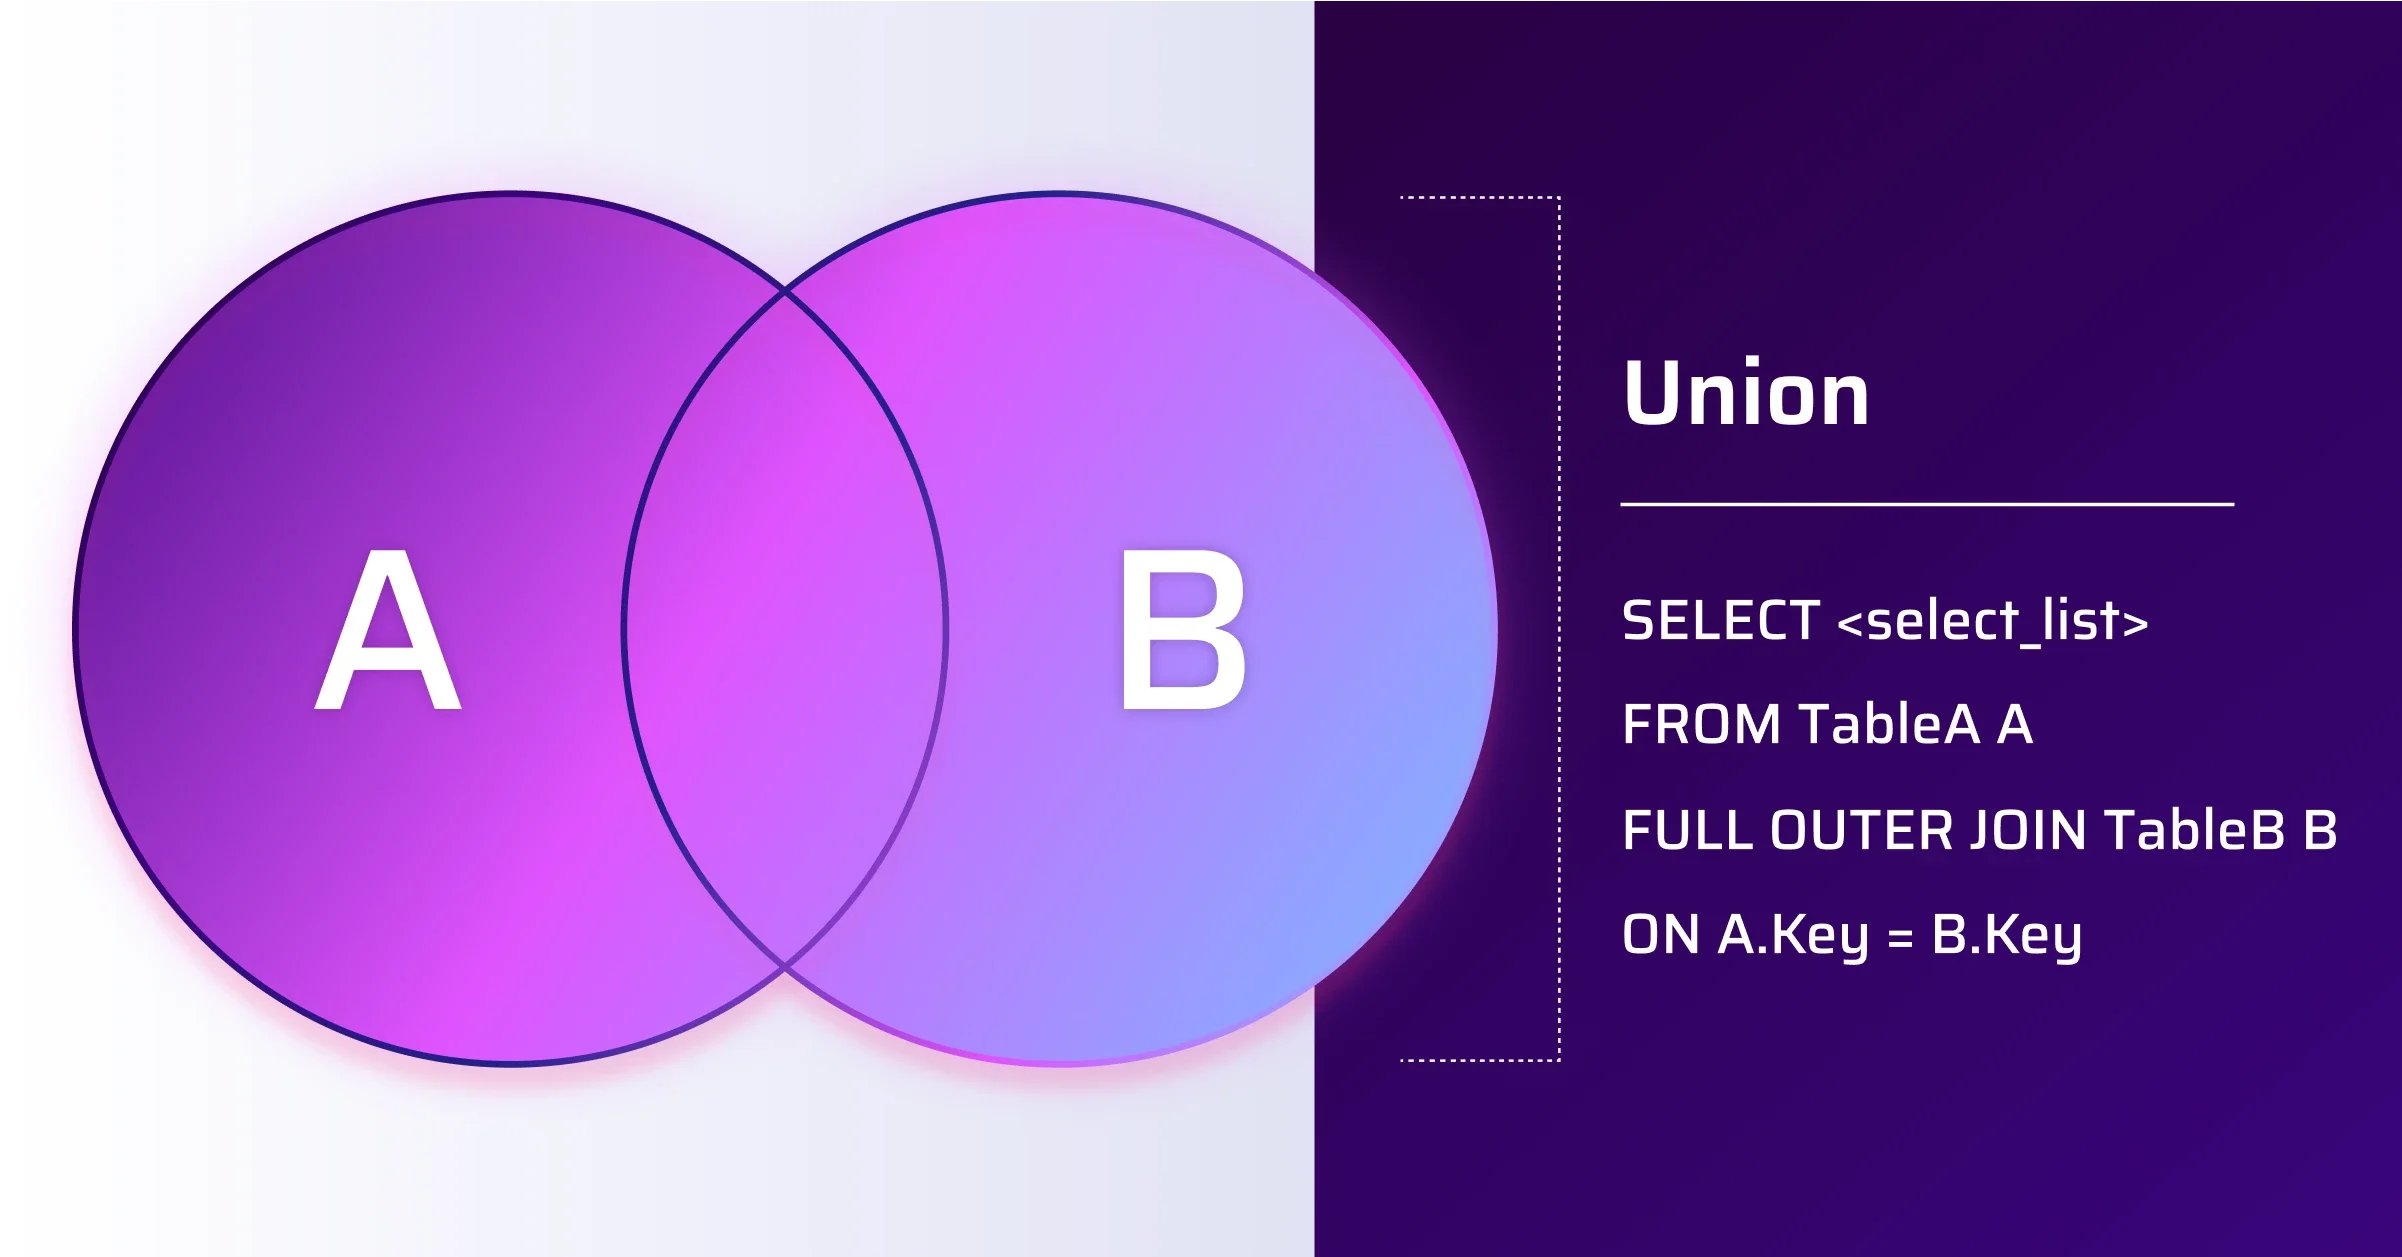 A venn diagram of a union, showing that everything in both sets is selected. 